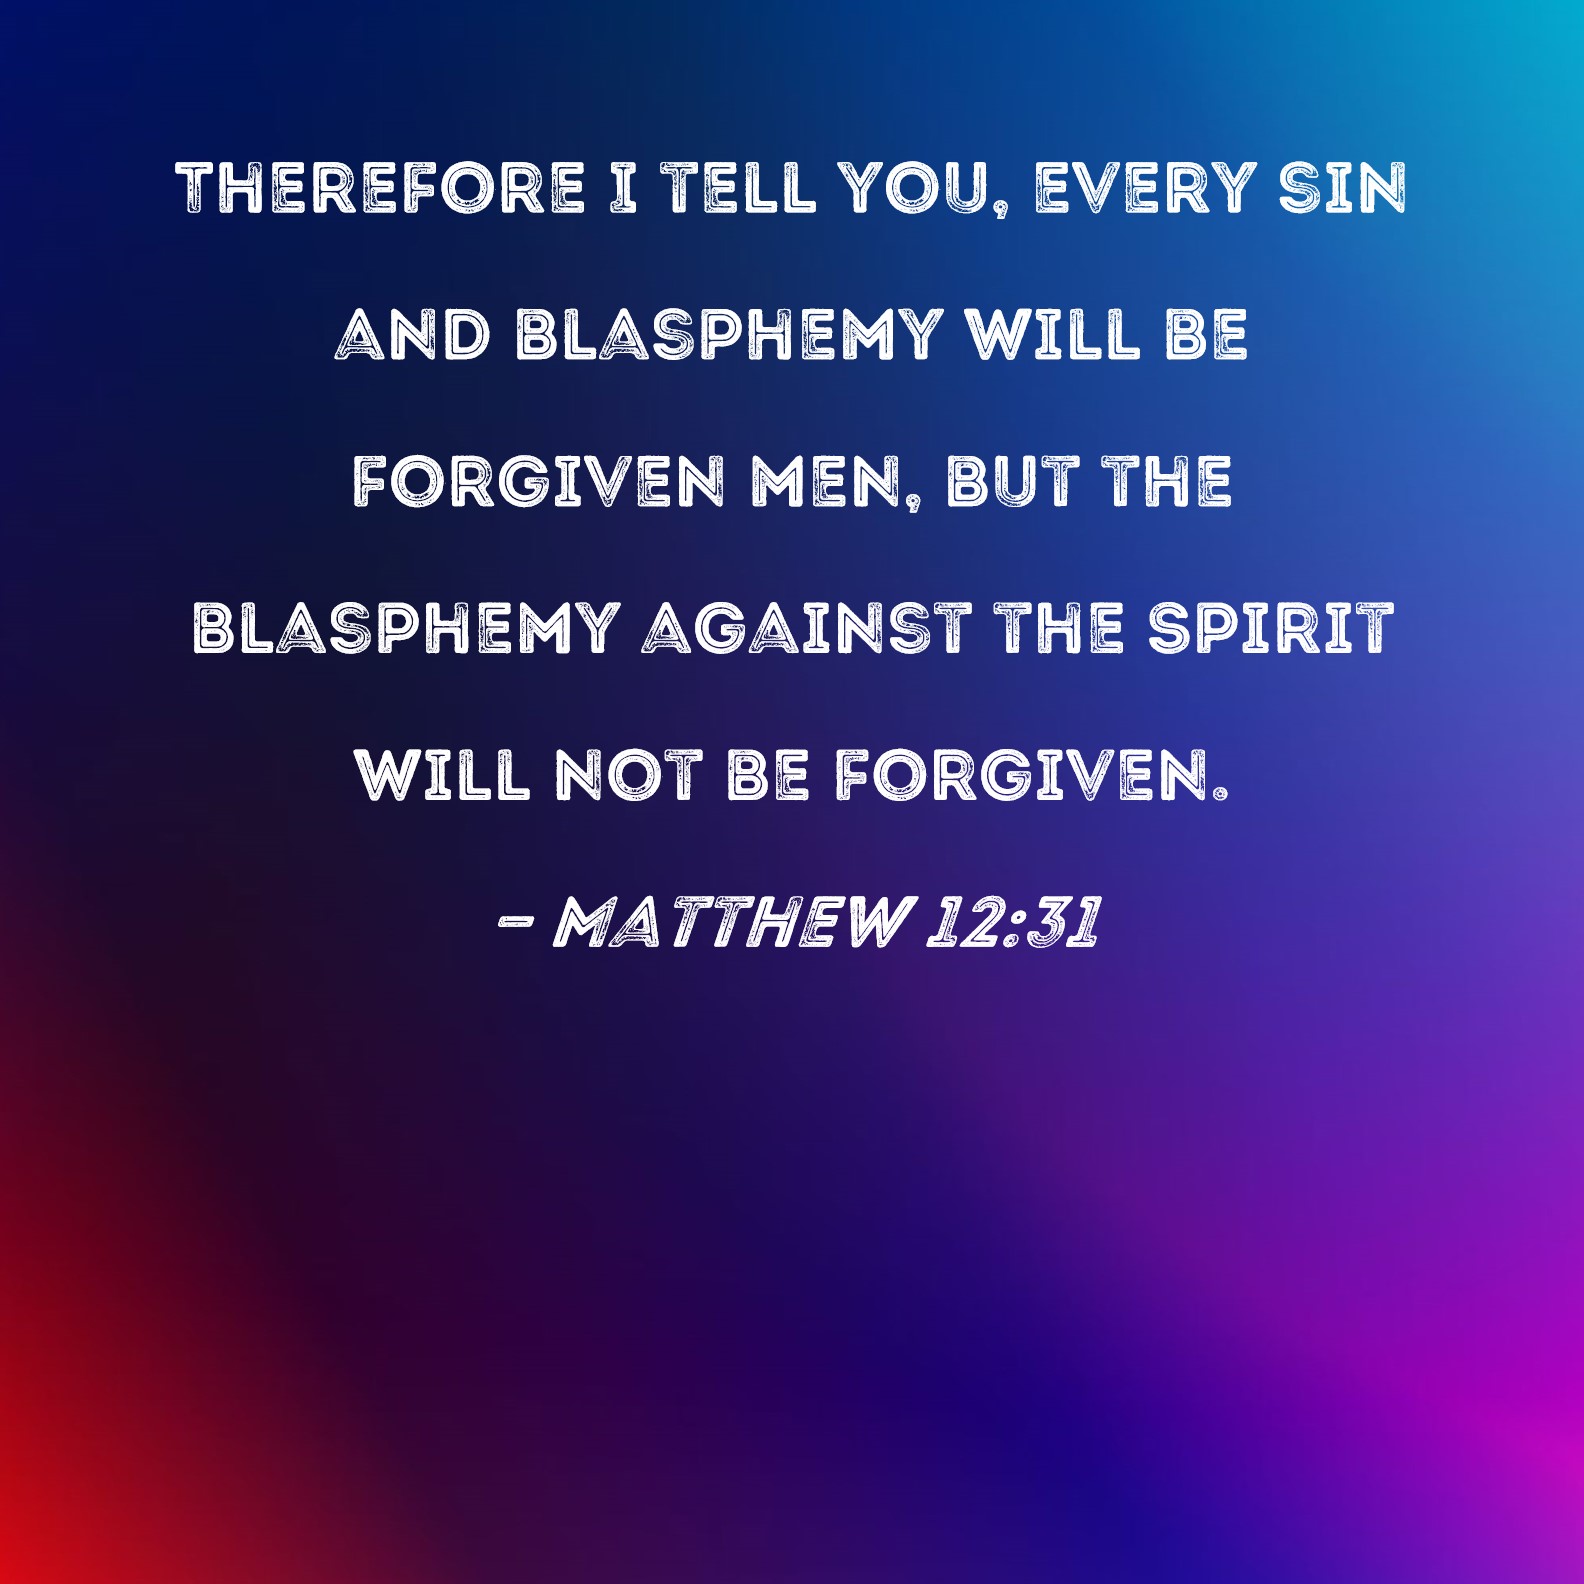 Matthew Therefore I Tell You Every Sin And Blasphemy Will Be Forgiven Men But The